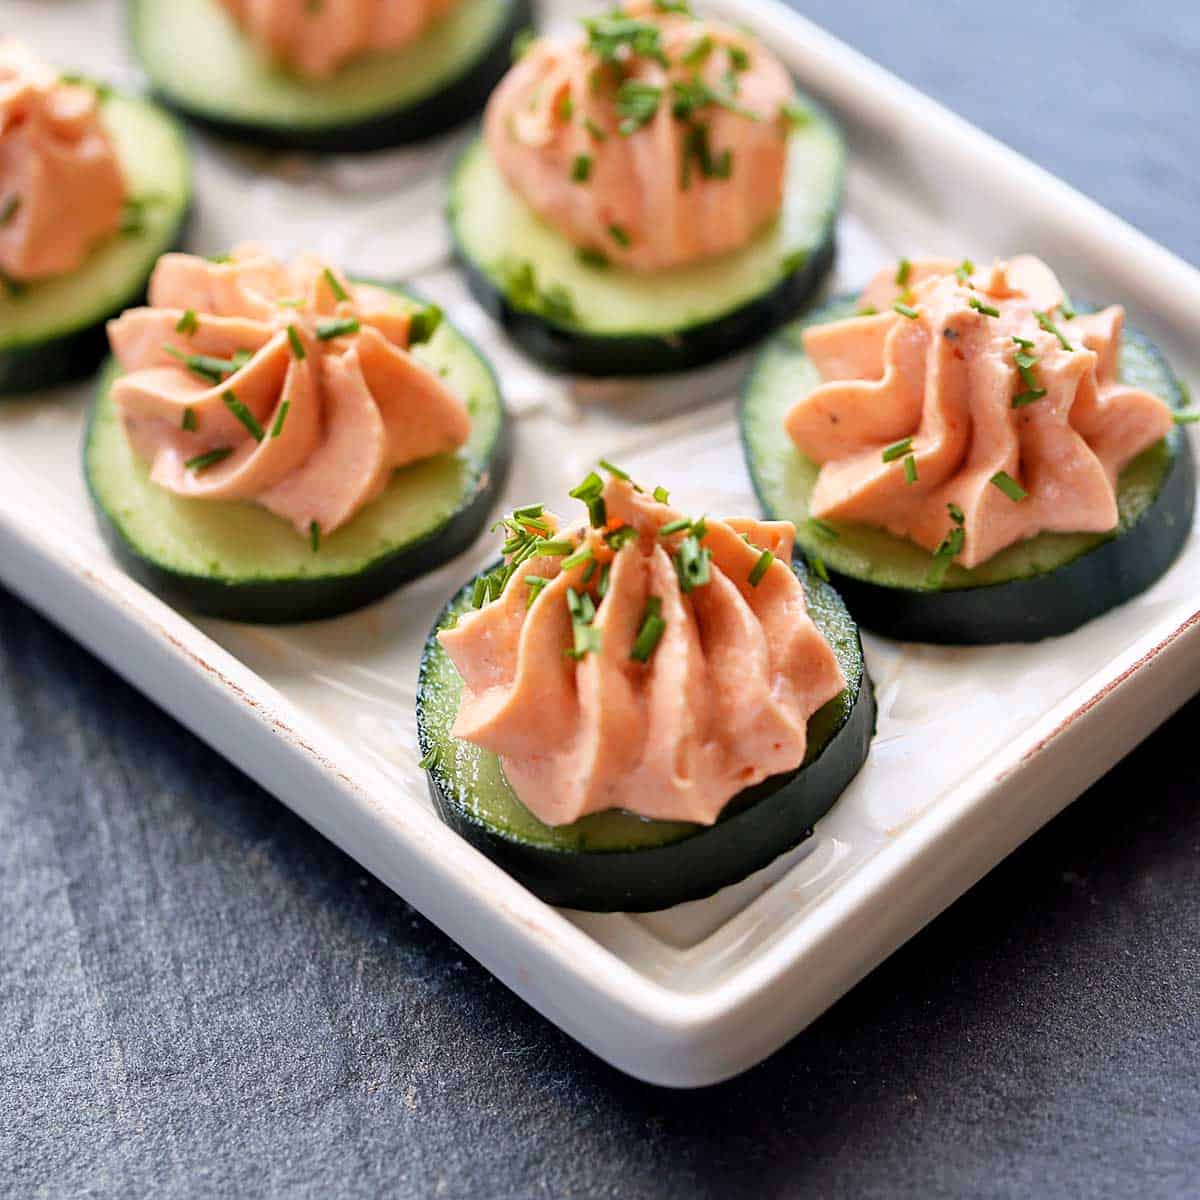 Smoked salmon mousse served on cucumber slices. 